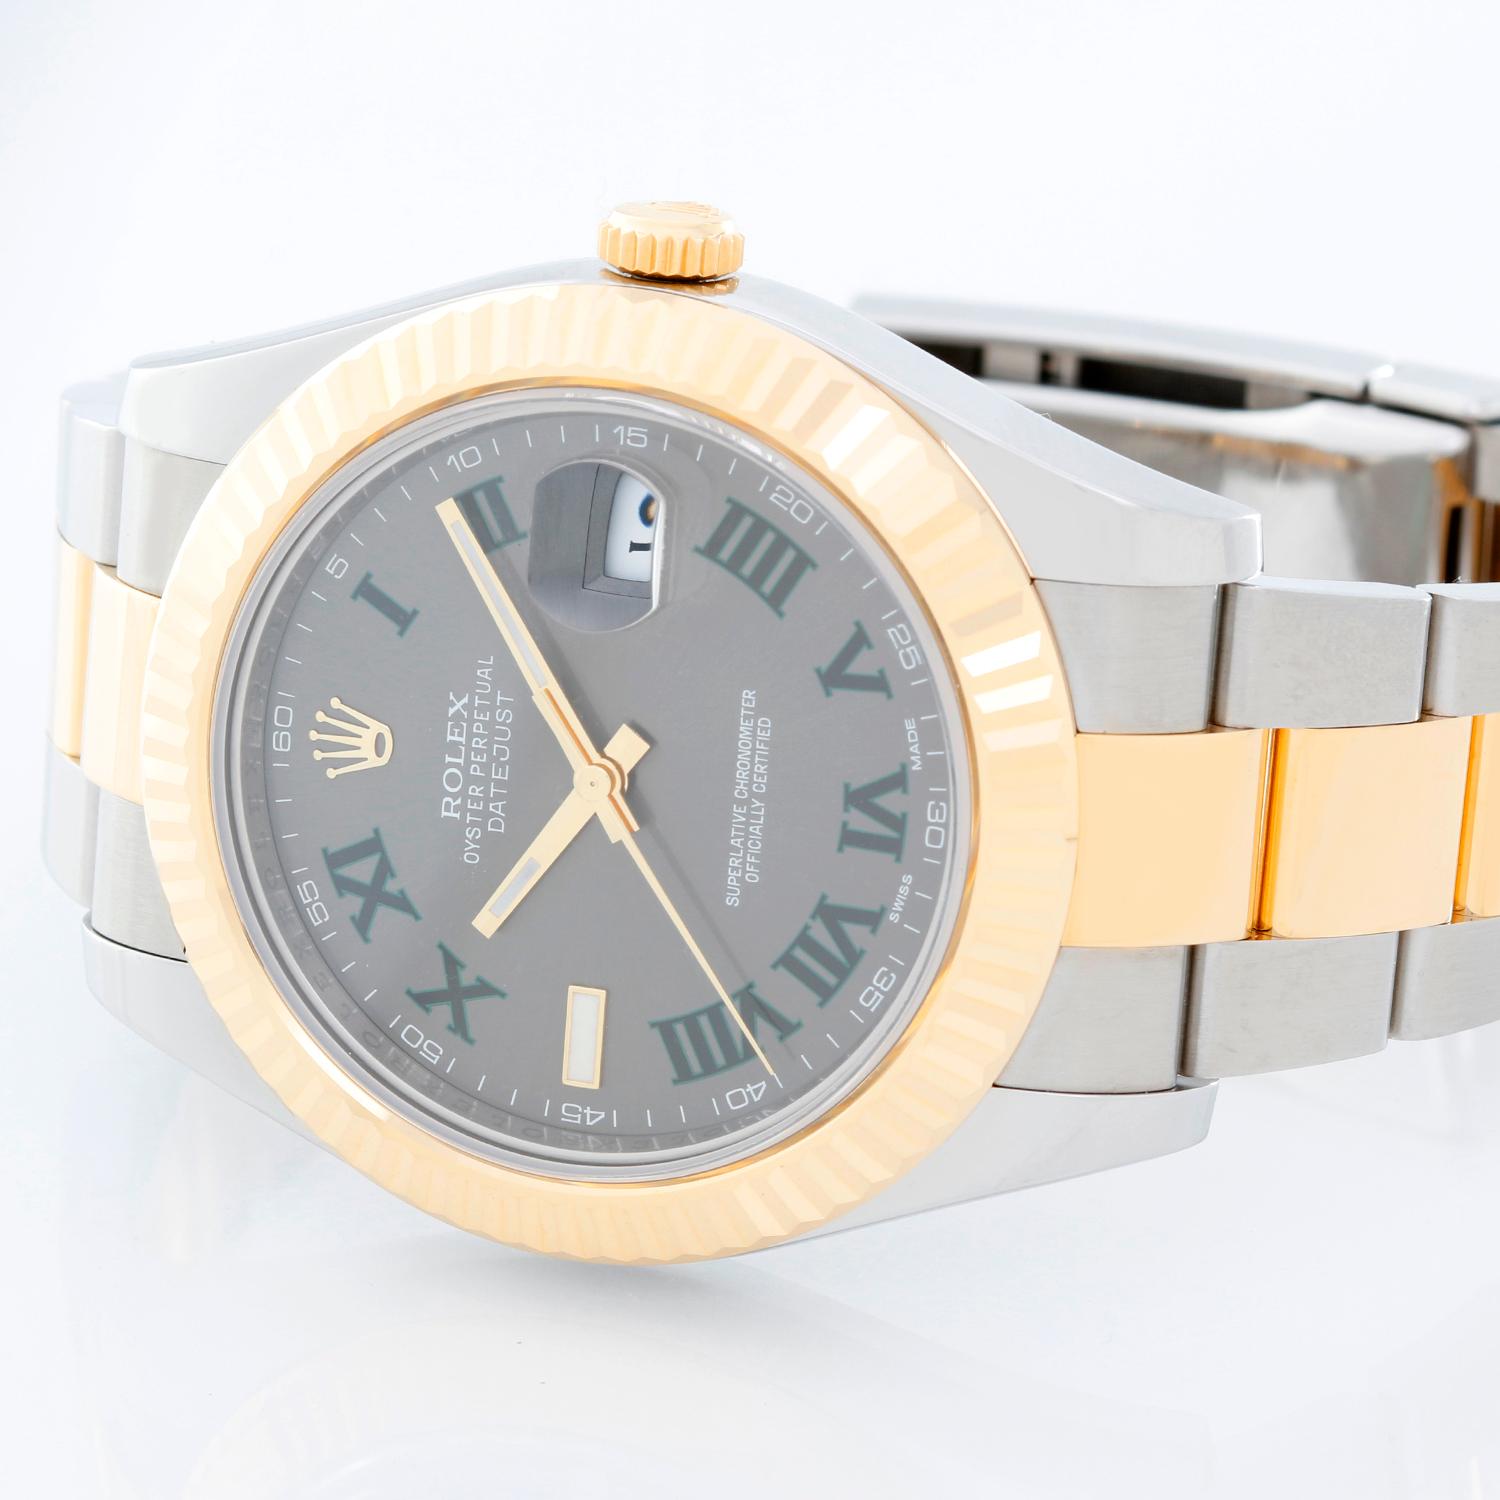 Rolex Datejust II  Men's 2-Tone Steel & Gold 41mm Watch 116333 - Automatic winding, Quickset, sapphire crystal. Stainless steel case with 18k yellow gold fluted bezel  (41mm diameter). Slate Gray dial with green Roman numerals; Marker at 9 o'clock.